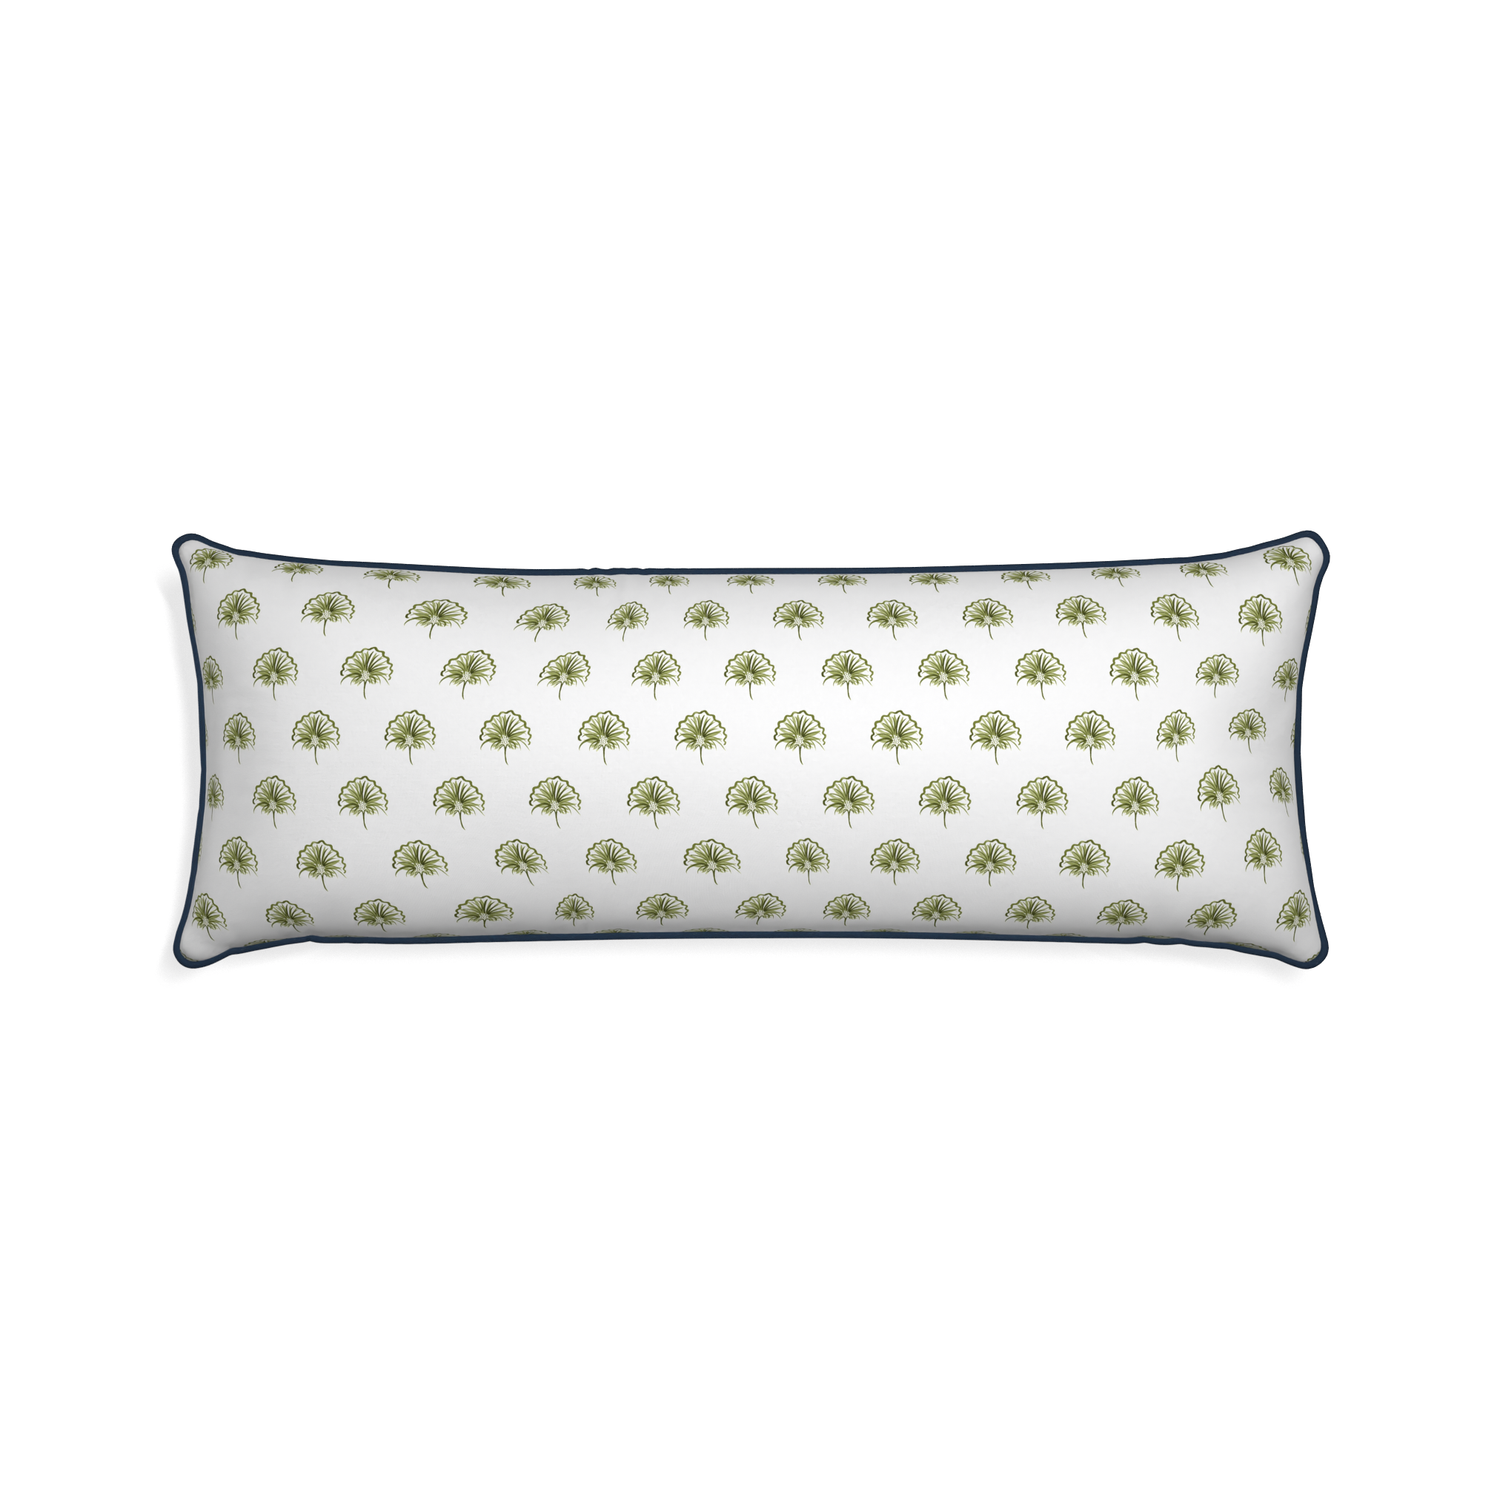 Xl-lumbar penelope moss custom green floralpillow with c piping on white background